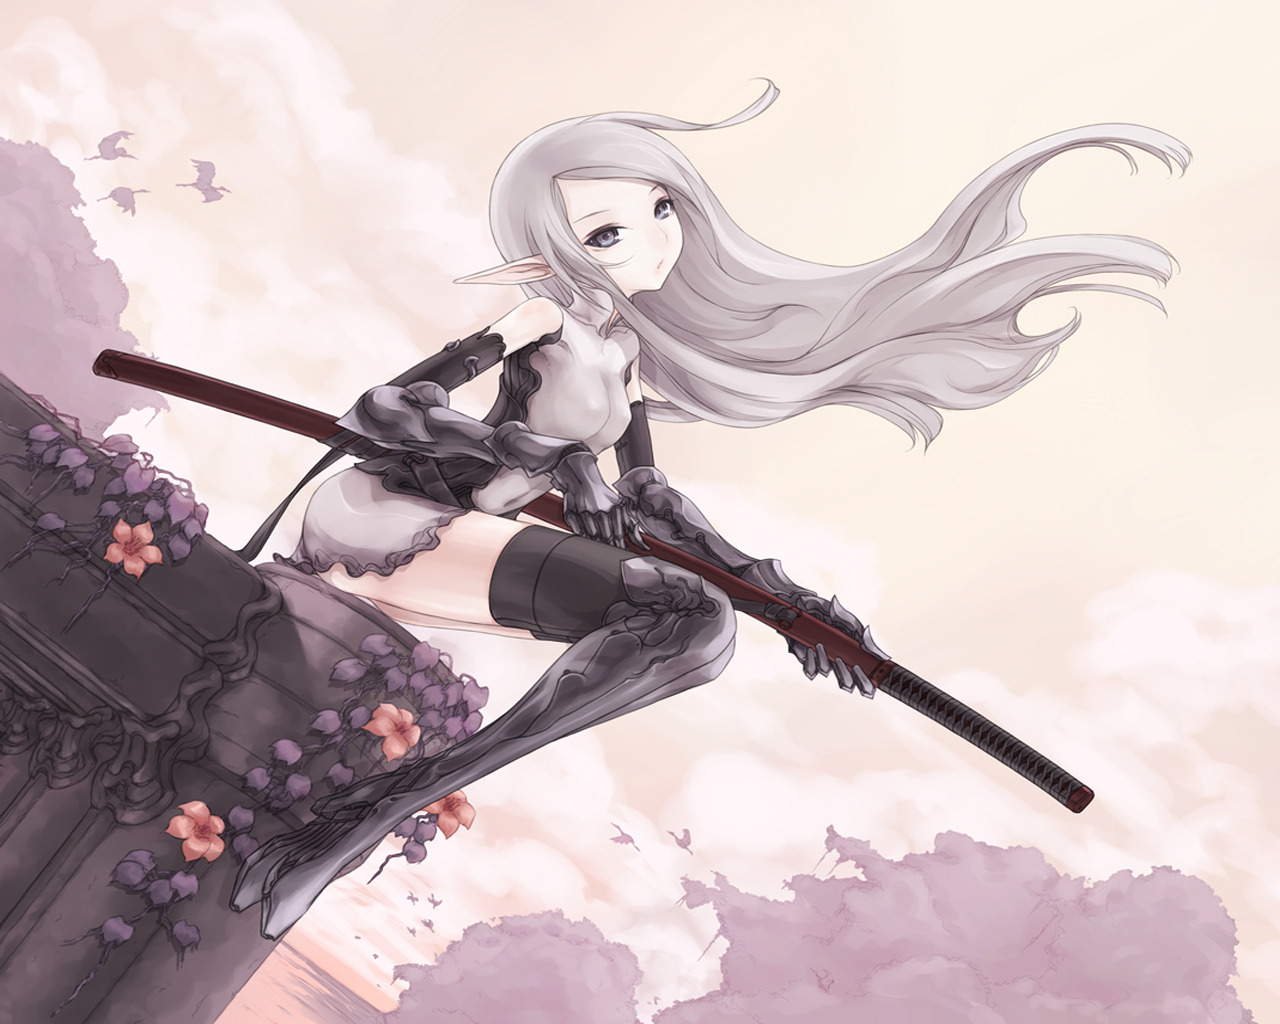 Image Anime Girl With Sword And Silver Hair Hd Anime Casero